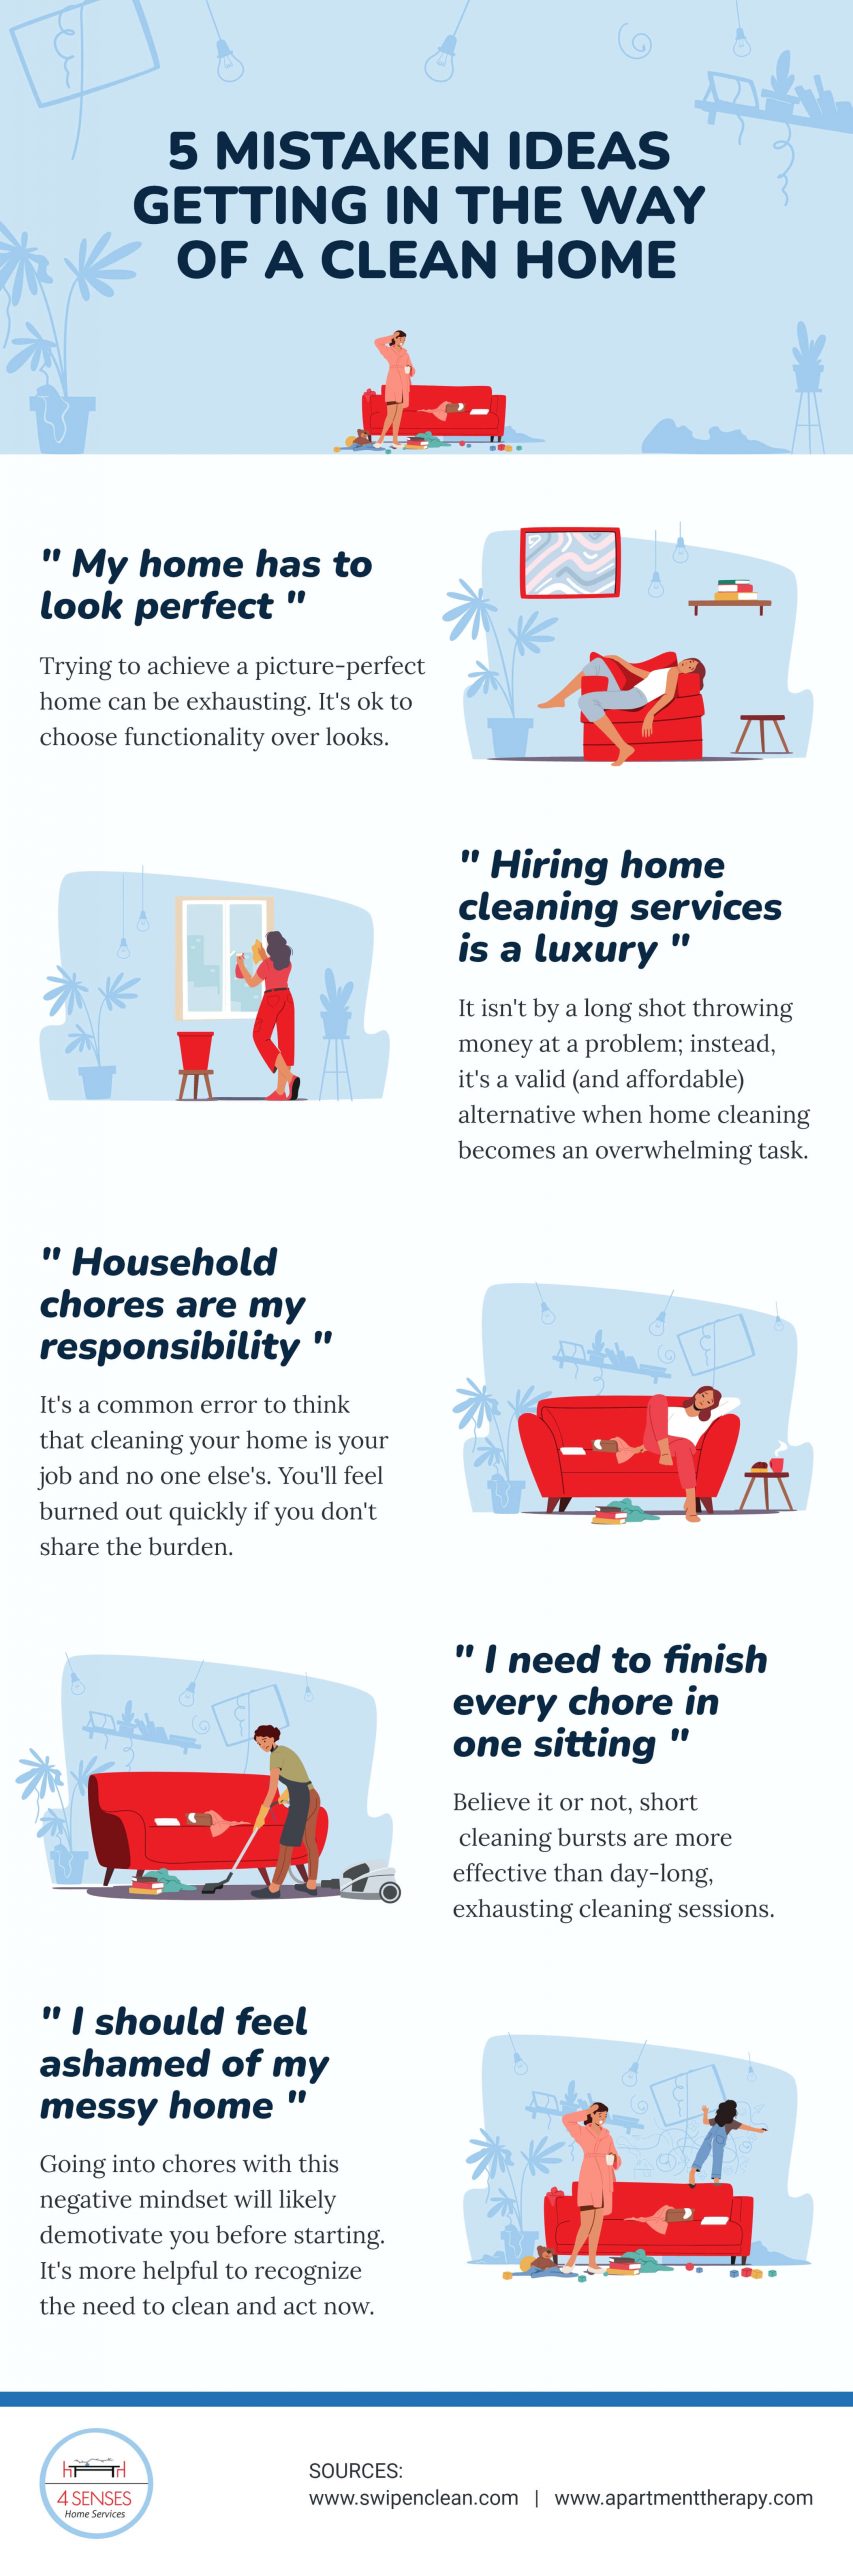 Efficient Cleaning Tips - arinsolangeathome